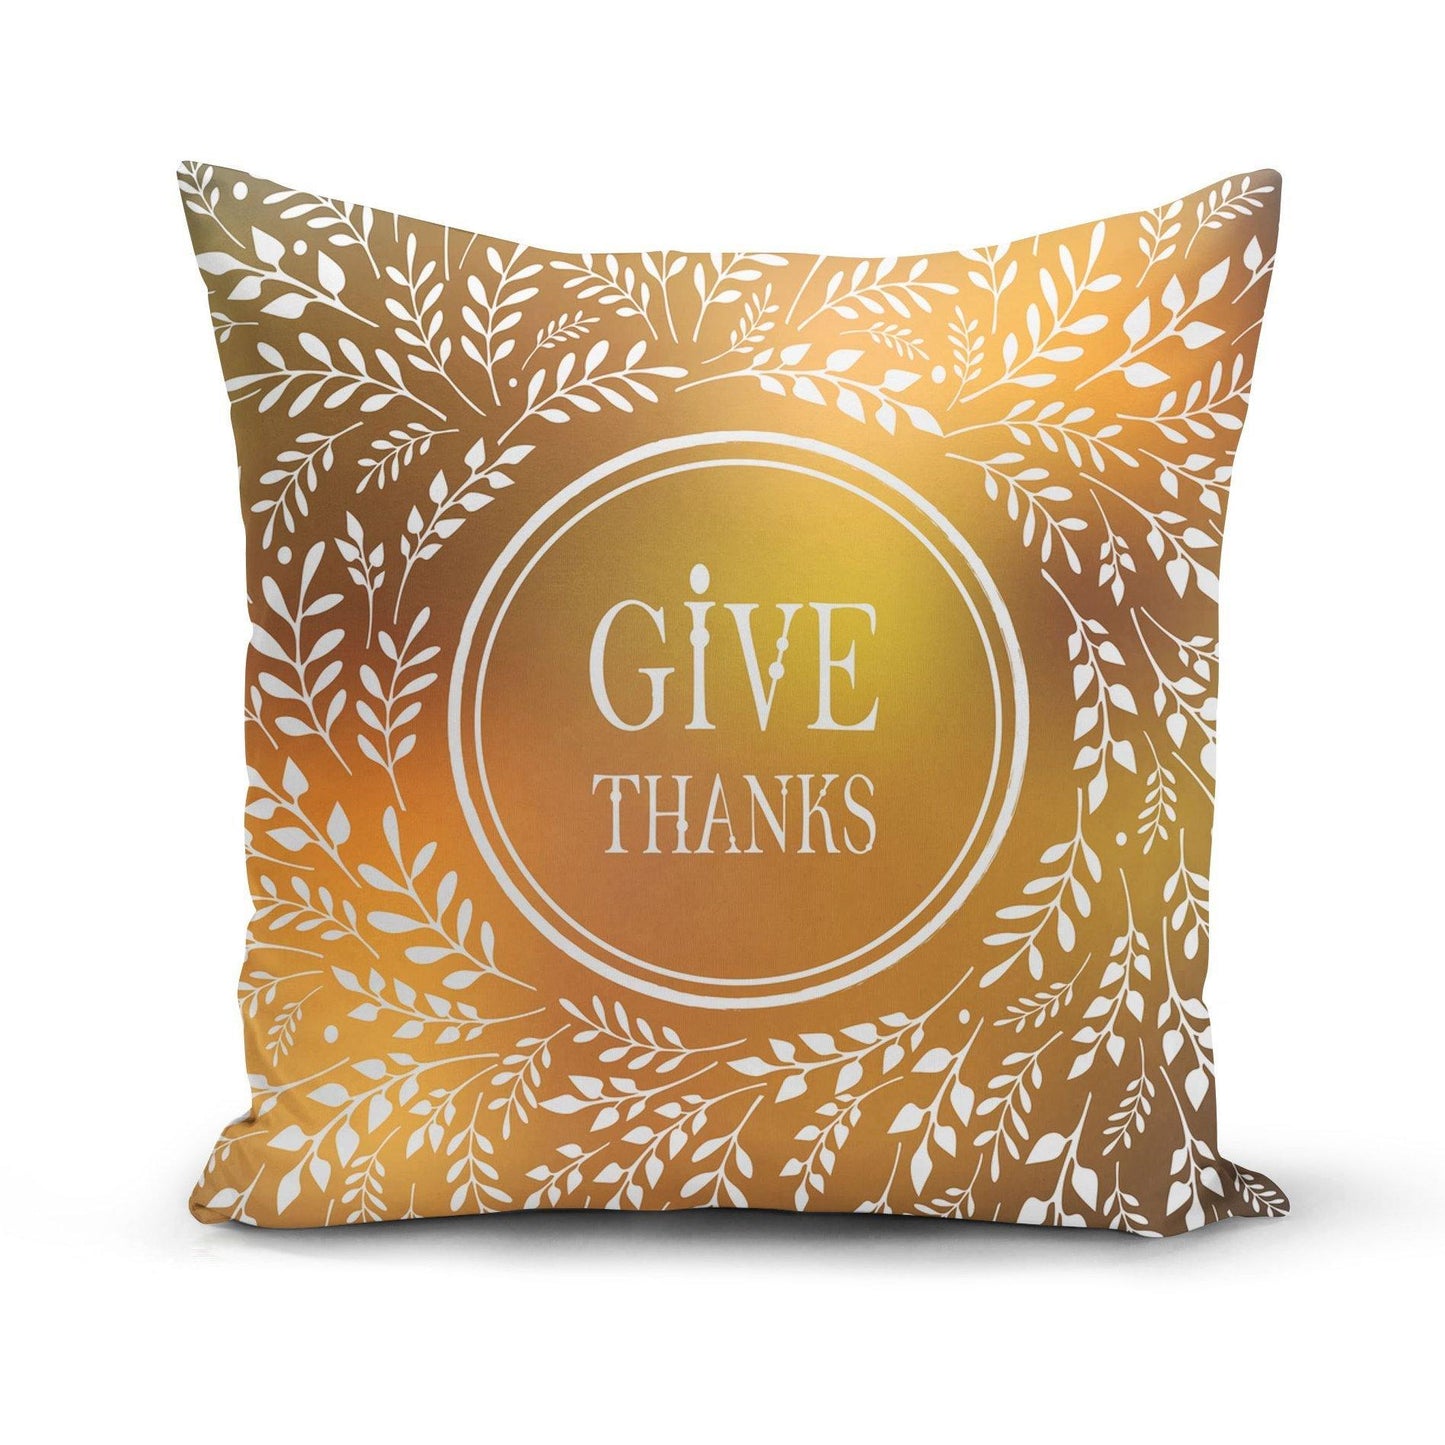 Give Thanks Pillow Cover